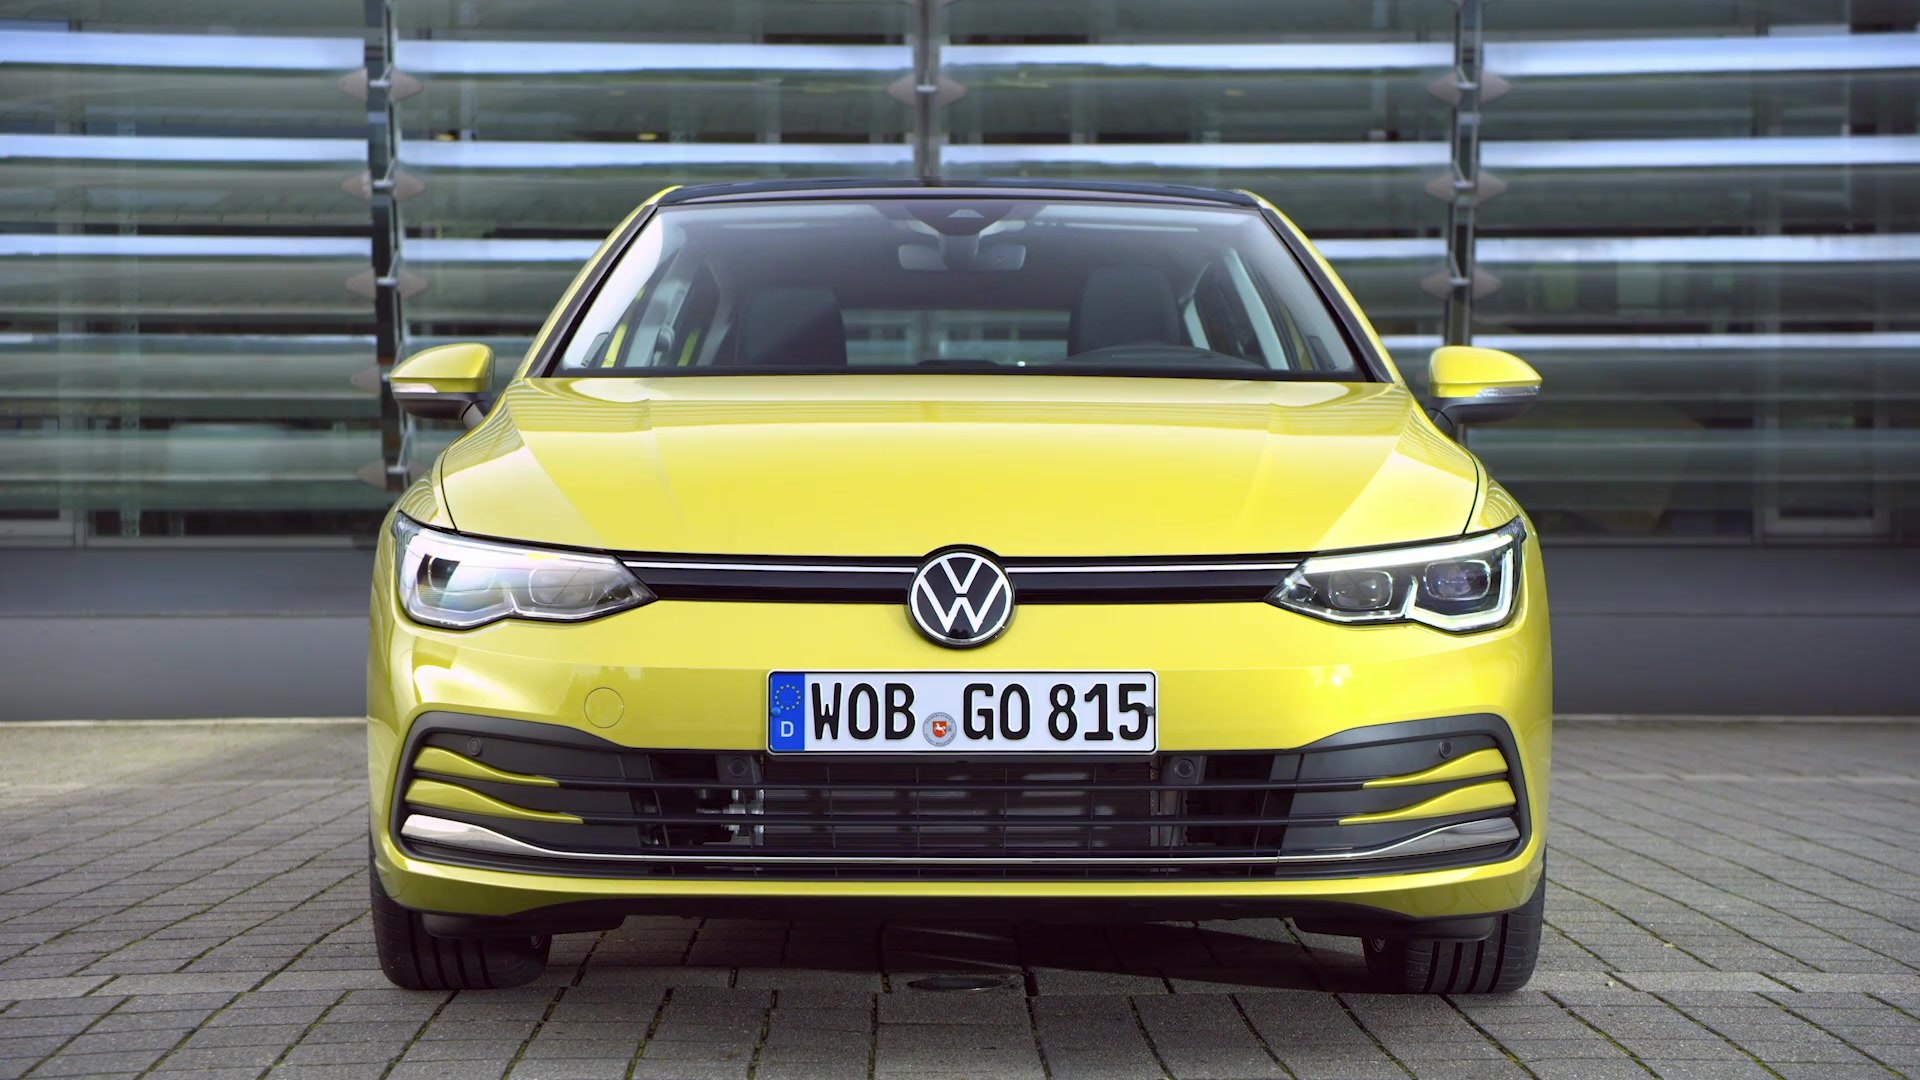 The New Volkswagen Golf 8 Exterior Design In Lime Yellow Video Dailymotion